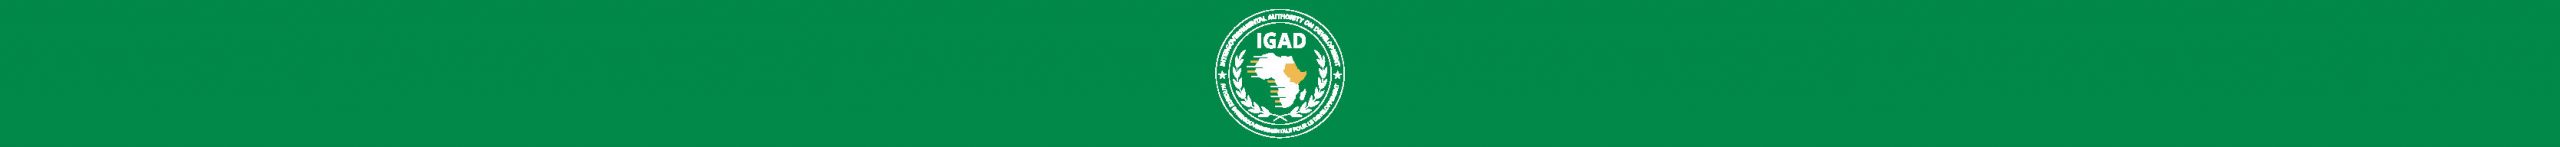 IGAD STRENGTHENS PARTNERSHIP WITH IOM TO ENHANCE CAPACITY FOR EFFECTIVE MIGRATION MANAGEMENT FOR MEMBER STATES